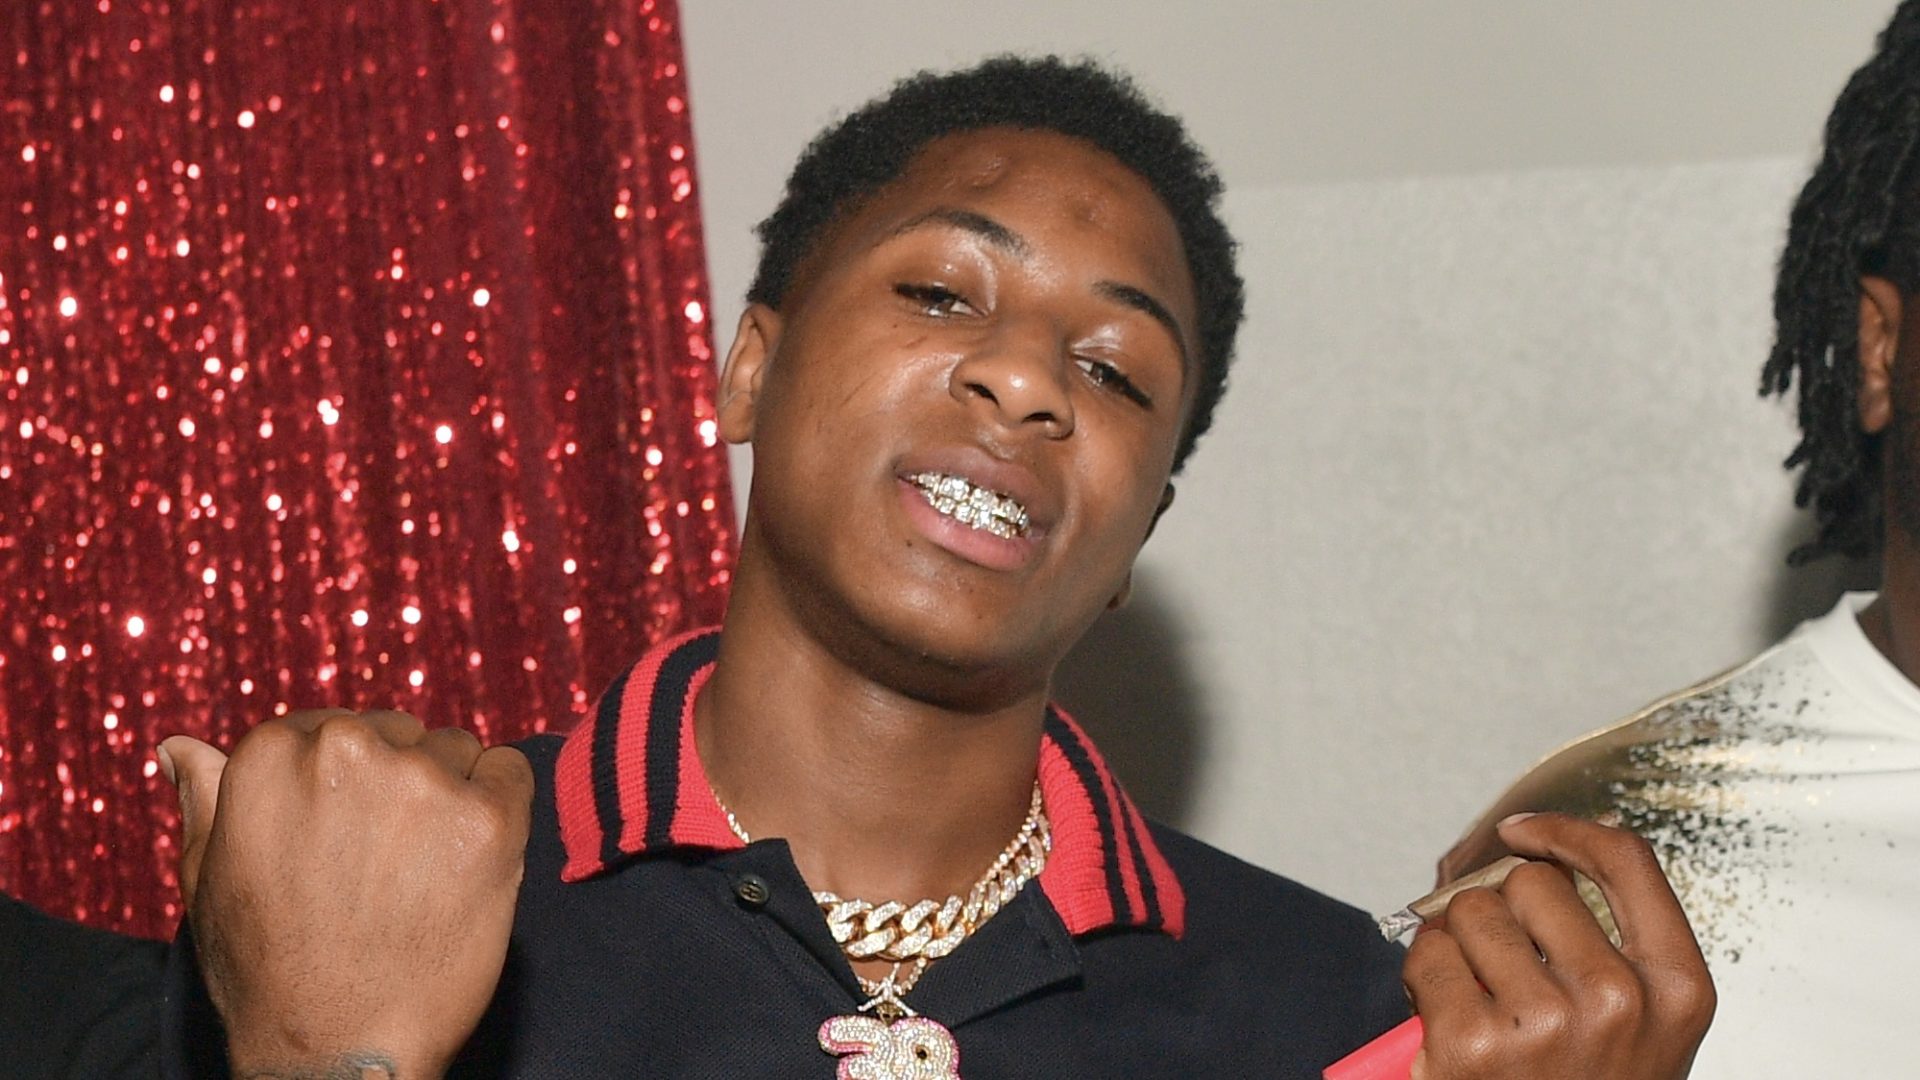 ATLANTA, GA - AUGUST 16: Rapper NBA Youngboy attends Young Thug's birthday party at Tago International on August 16, 2017 in Atlanta, Georgia.